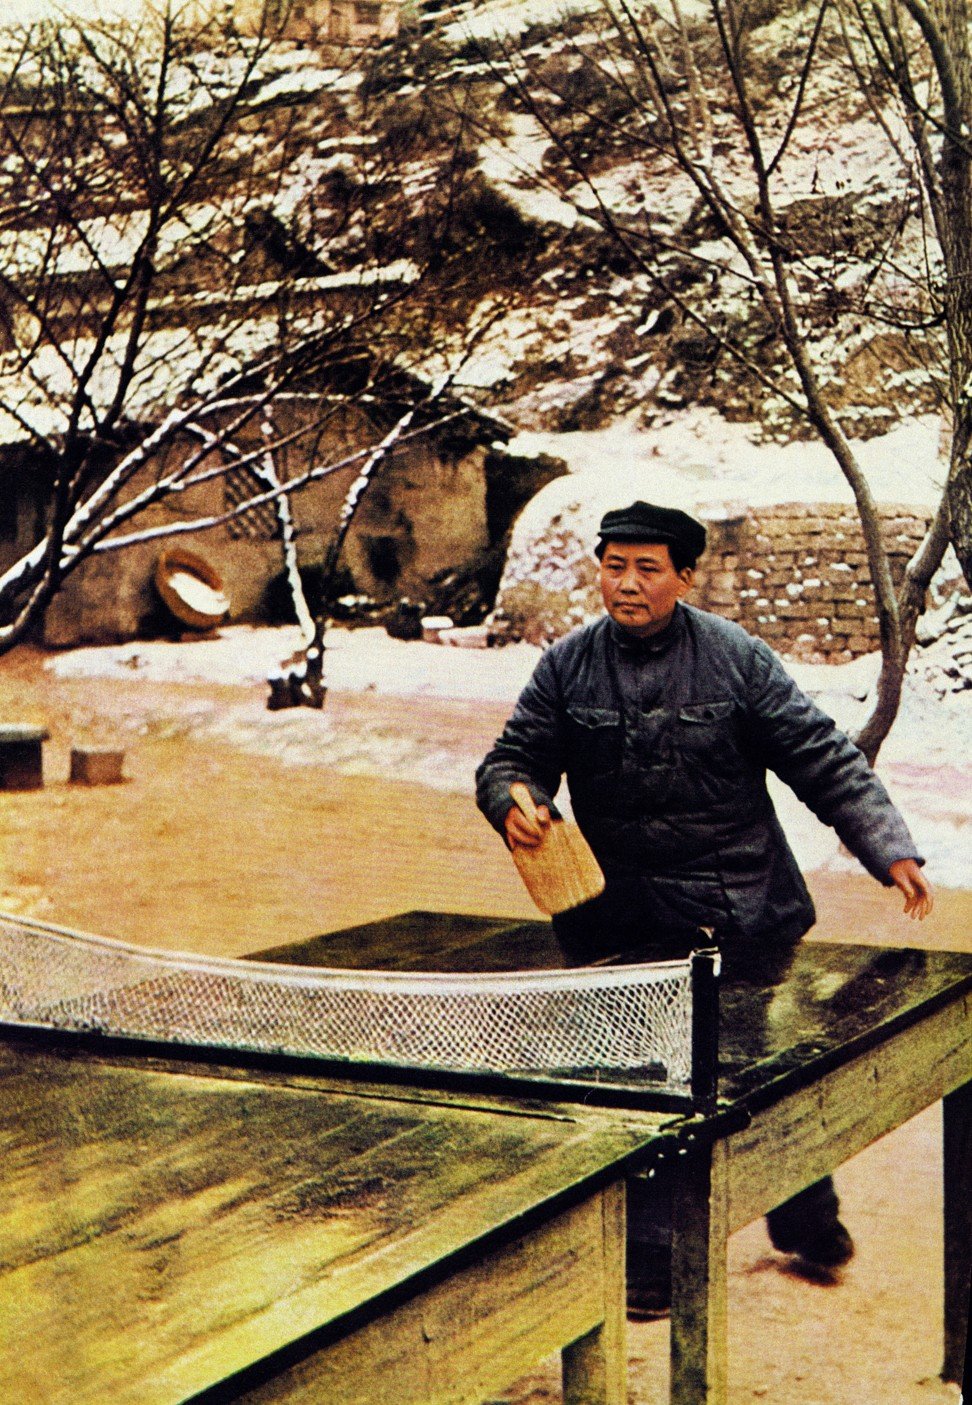 Mao Zedong playing table tennis, in Yanan, Shaanxi province, in 1945. Photo: Alamy